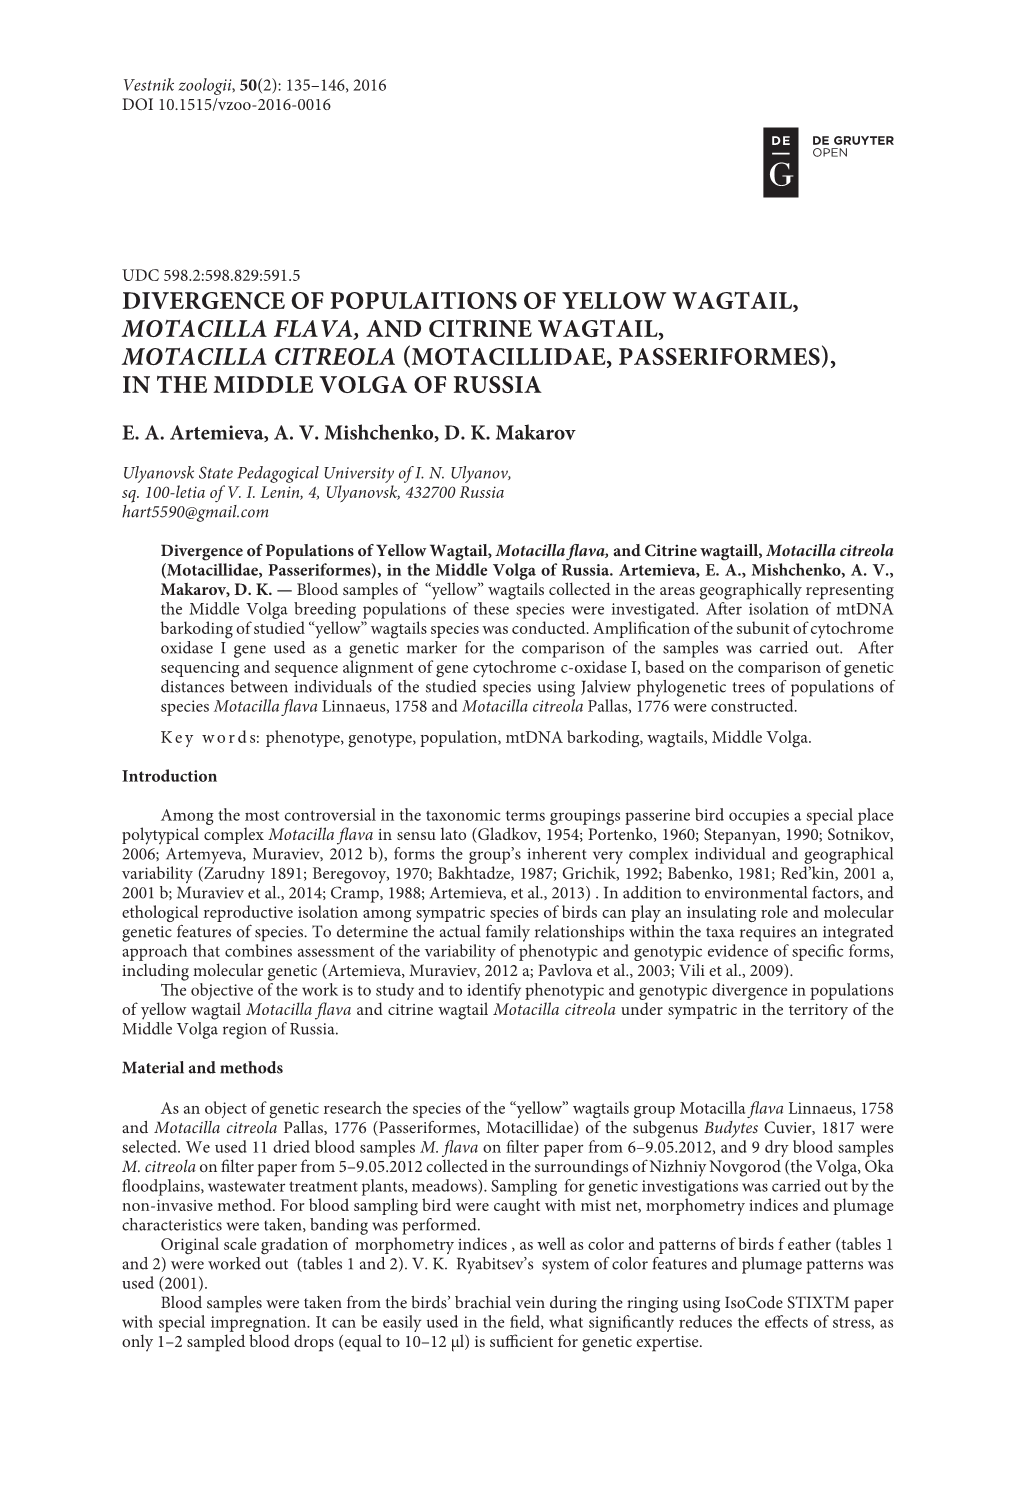 Divergence of Populaitions of Yellow Wagtail, Motacilla Flava, and Citrine Wagtail, Motacilla Citreola (Motacillidae, Passeriformes), in the Middle Volga of Russia